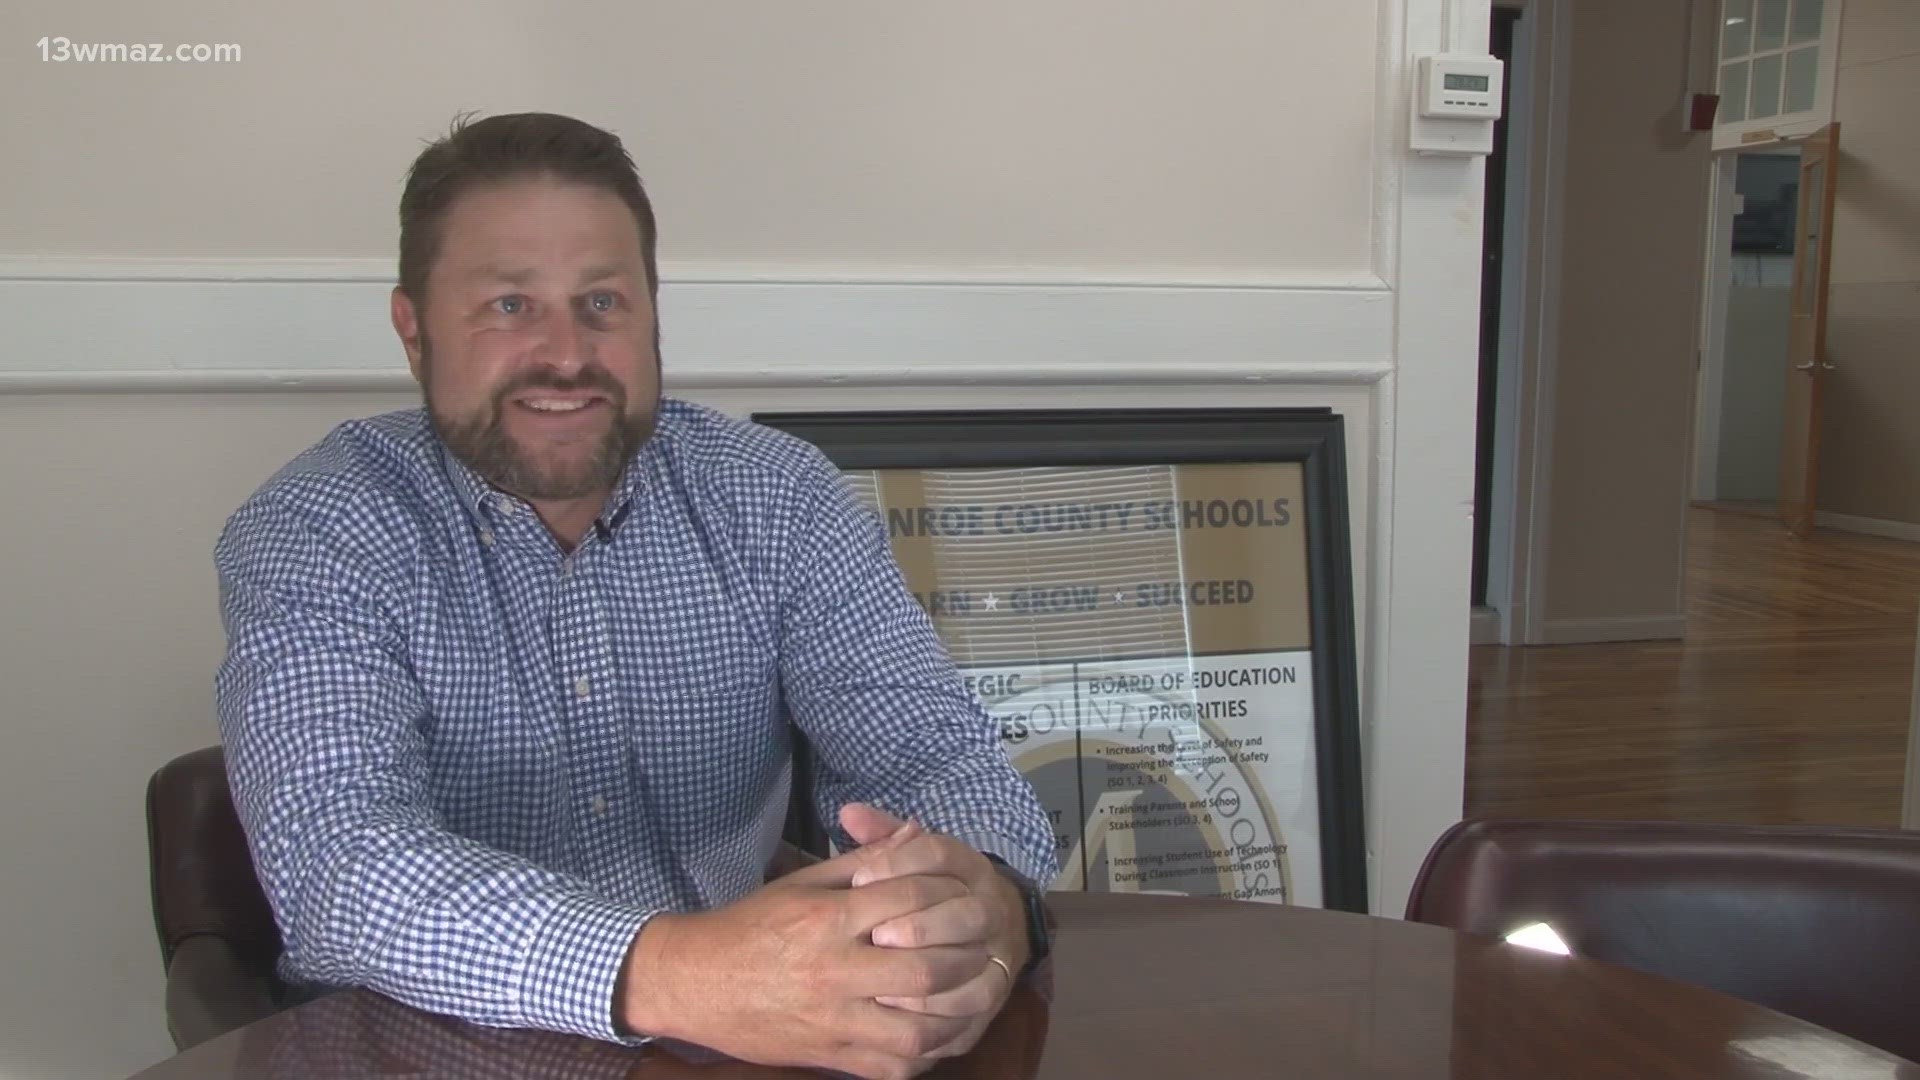 As Jim Finch gets ready to start the new school year as the superintendent, he knows he's got to keep Monroe County one of the top school districts in the state.